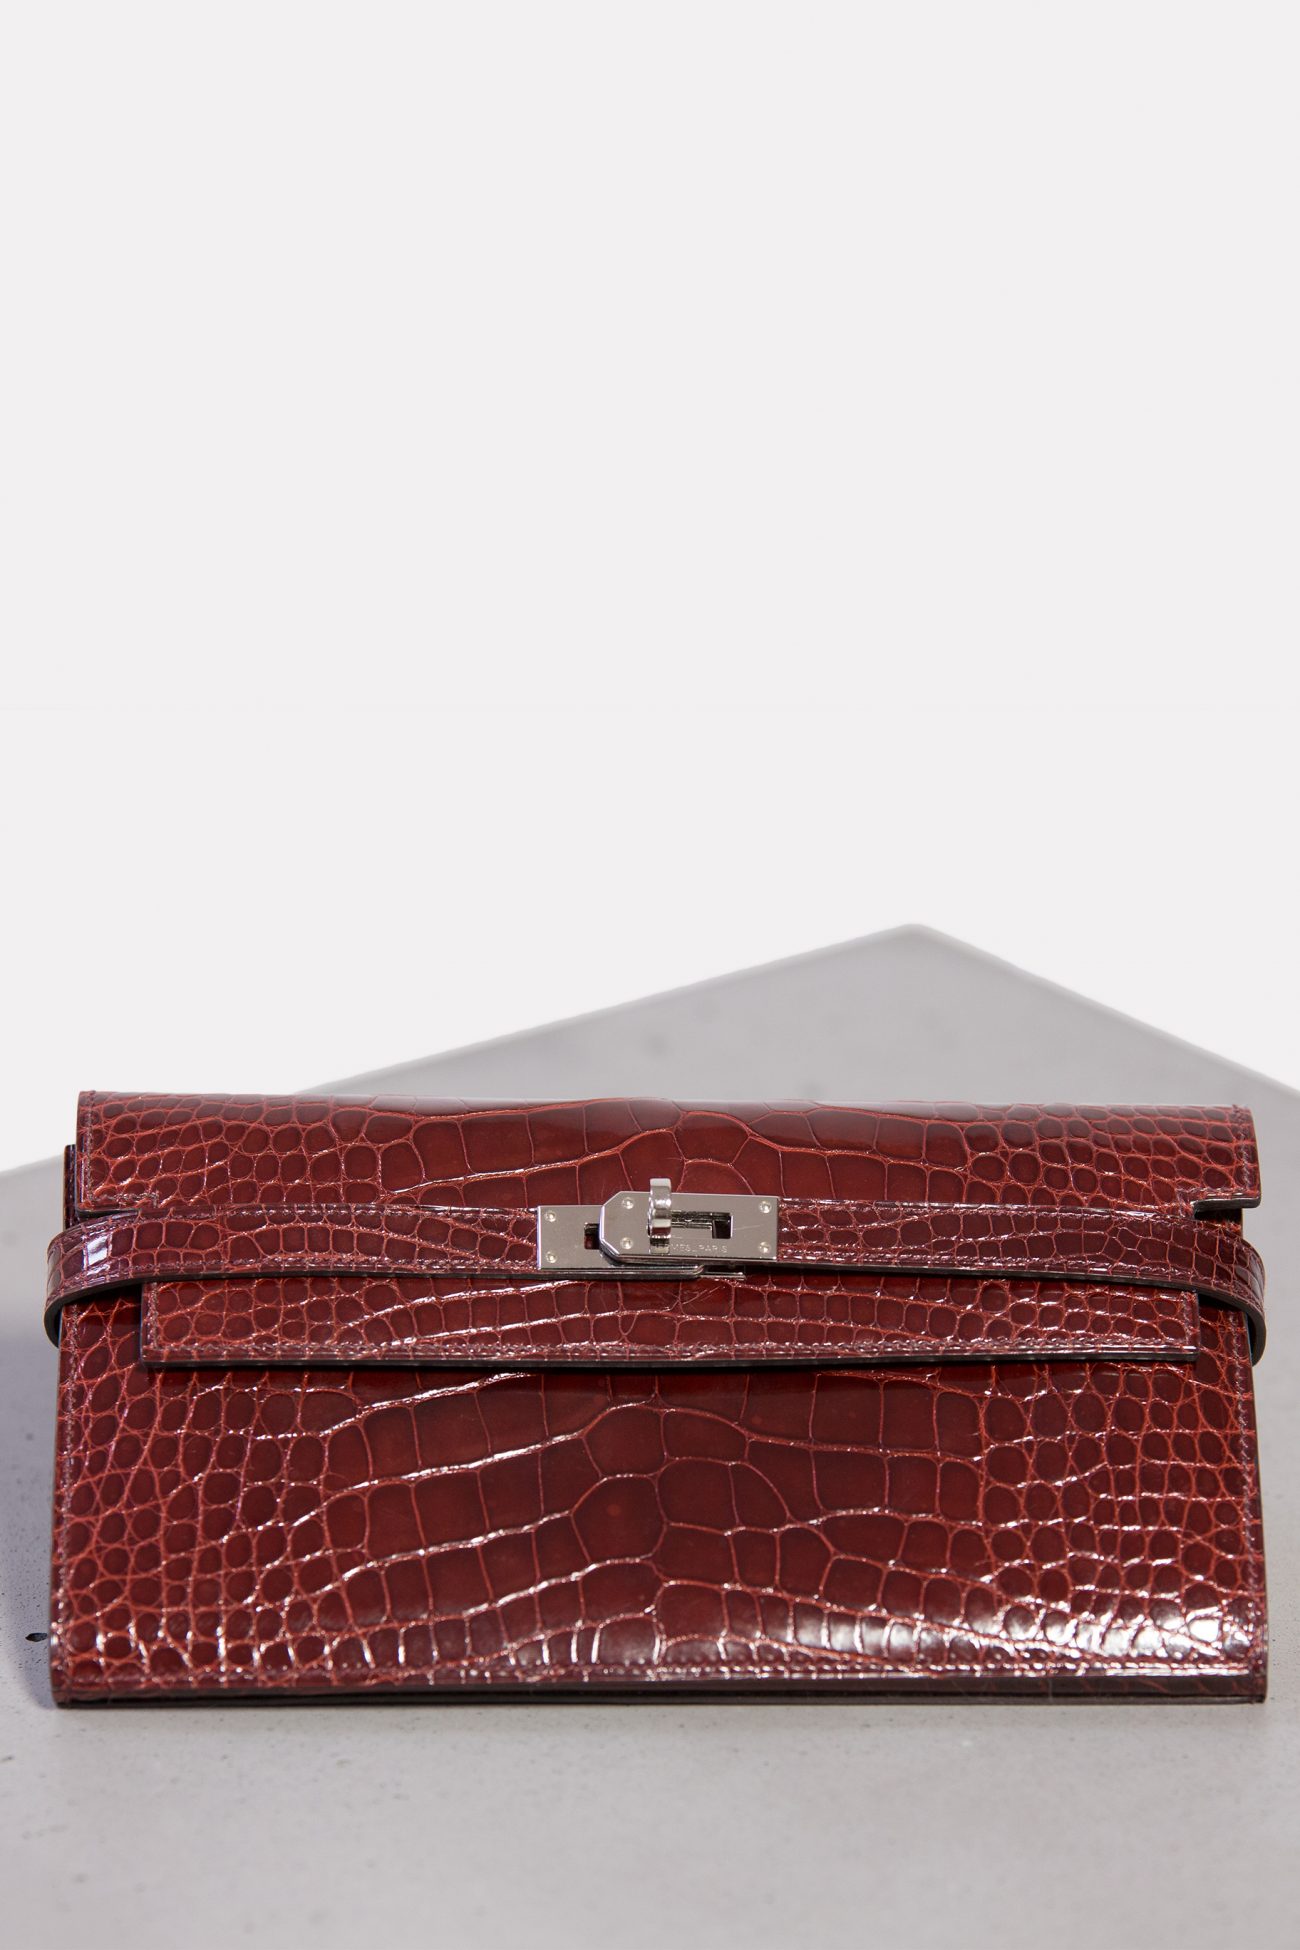 Hermes Kelly Wallet - Huntessa Luxury Online Consignment Boutique